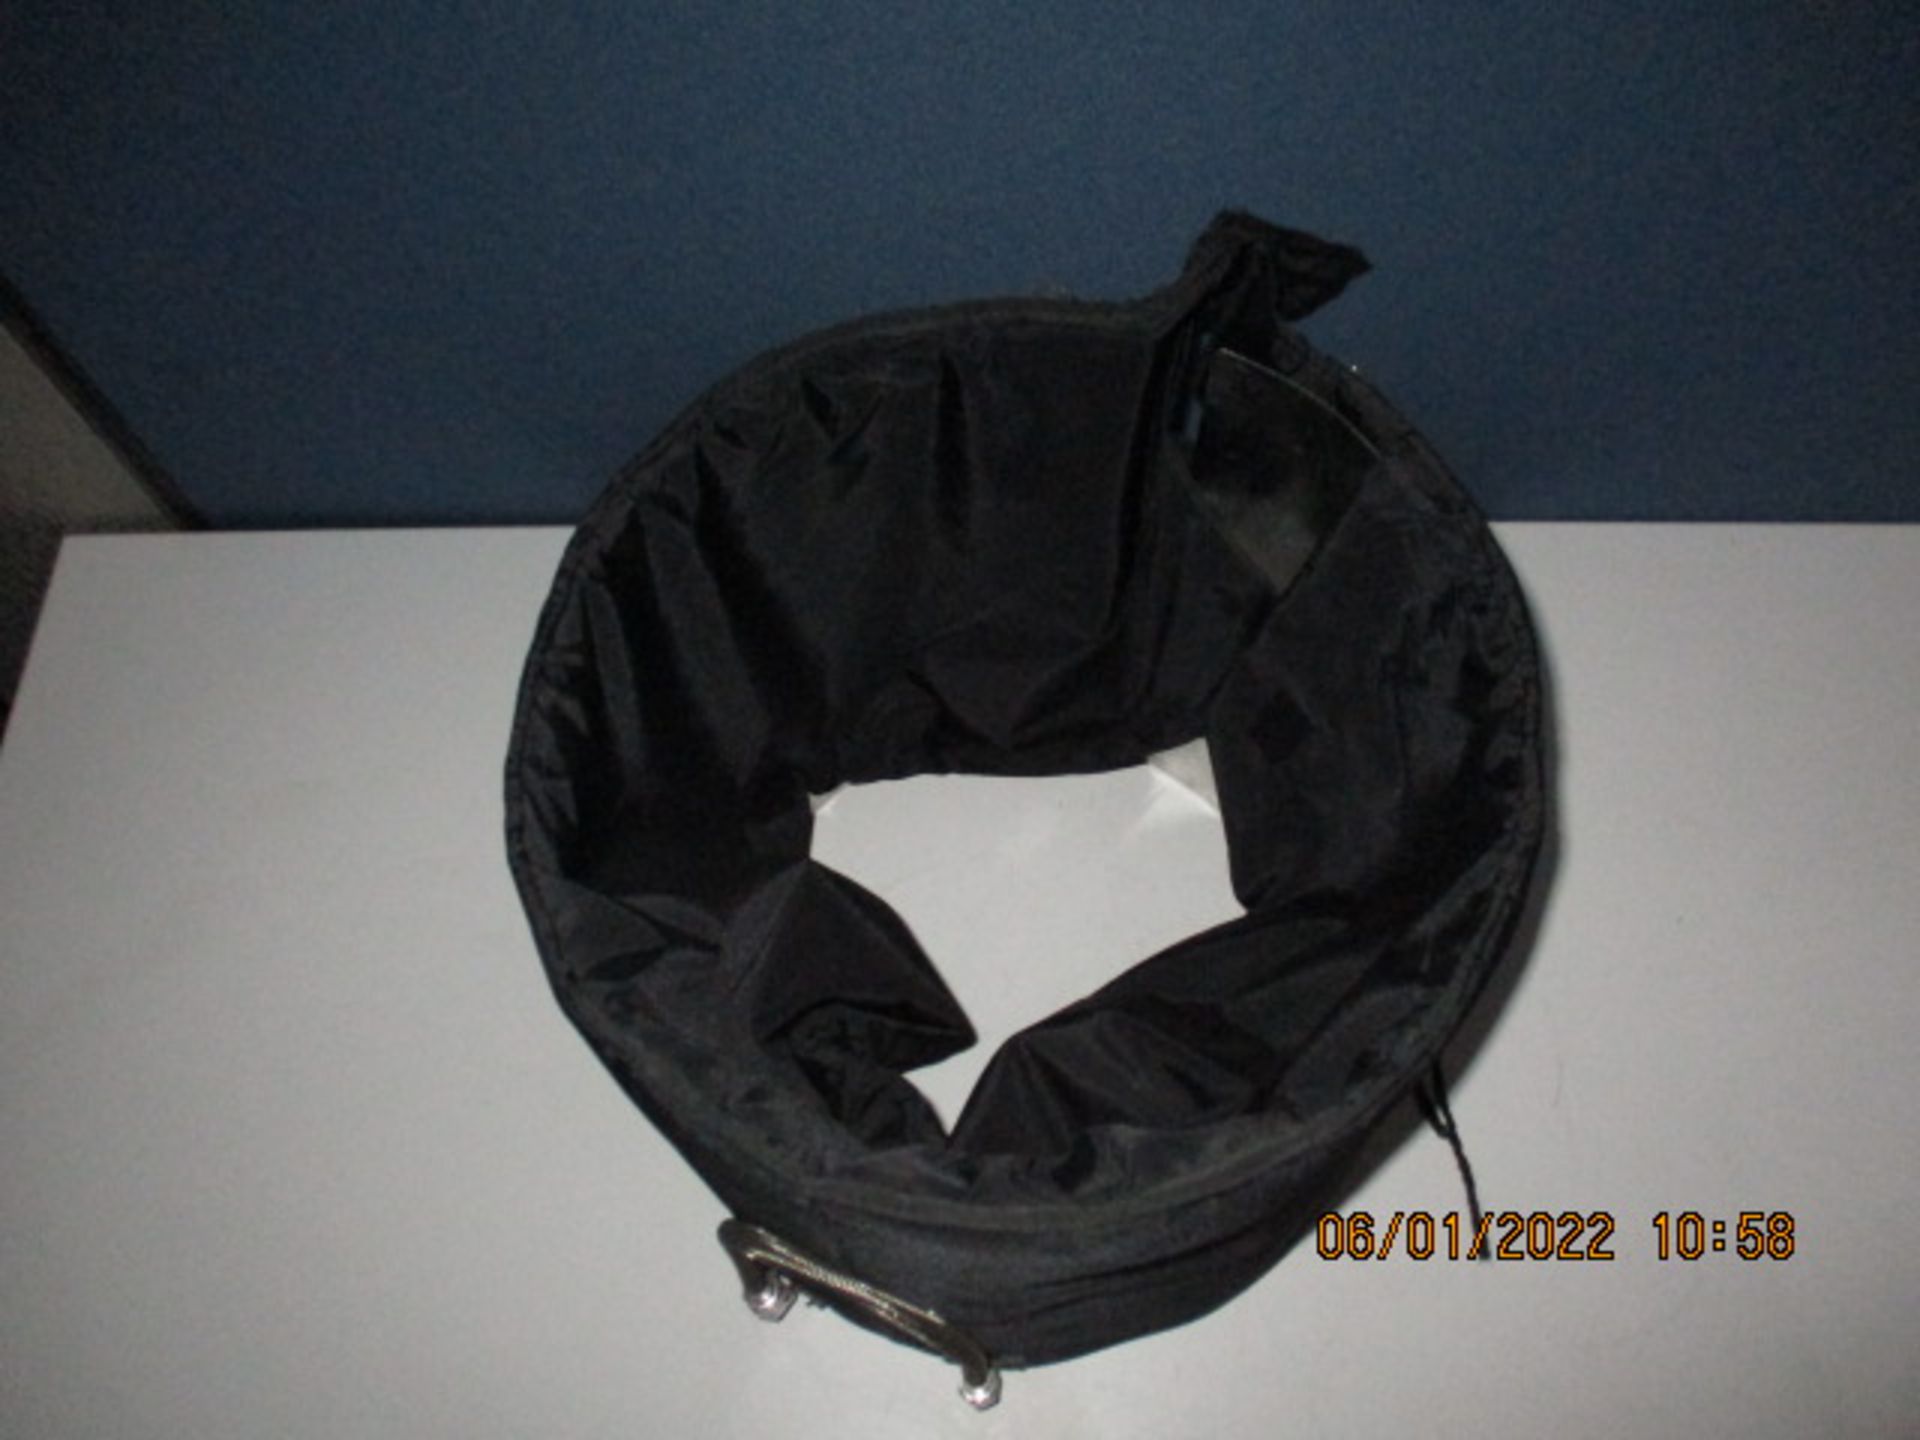 ACCURATE GAS CONTROL SYSTEMS INC TANK JACKET SMALL - Image 2 of 3